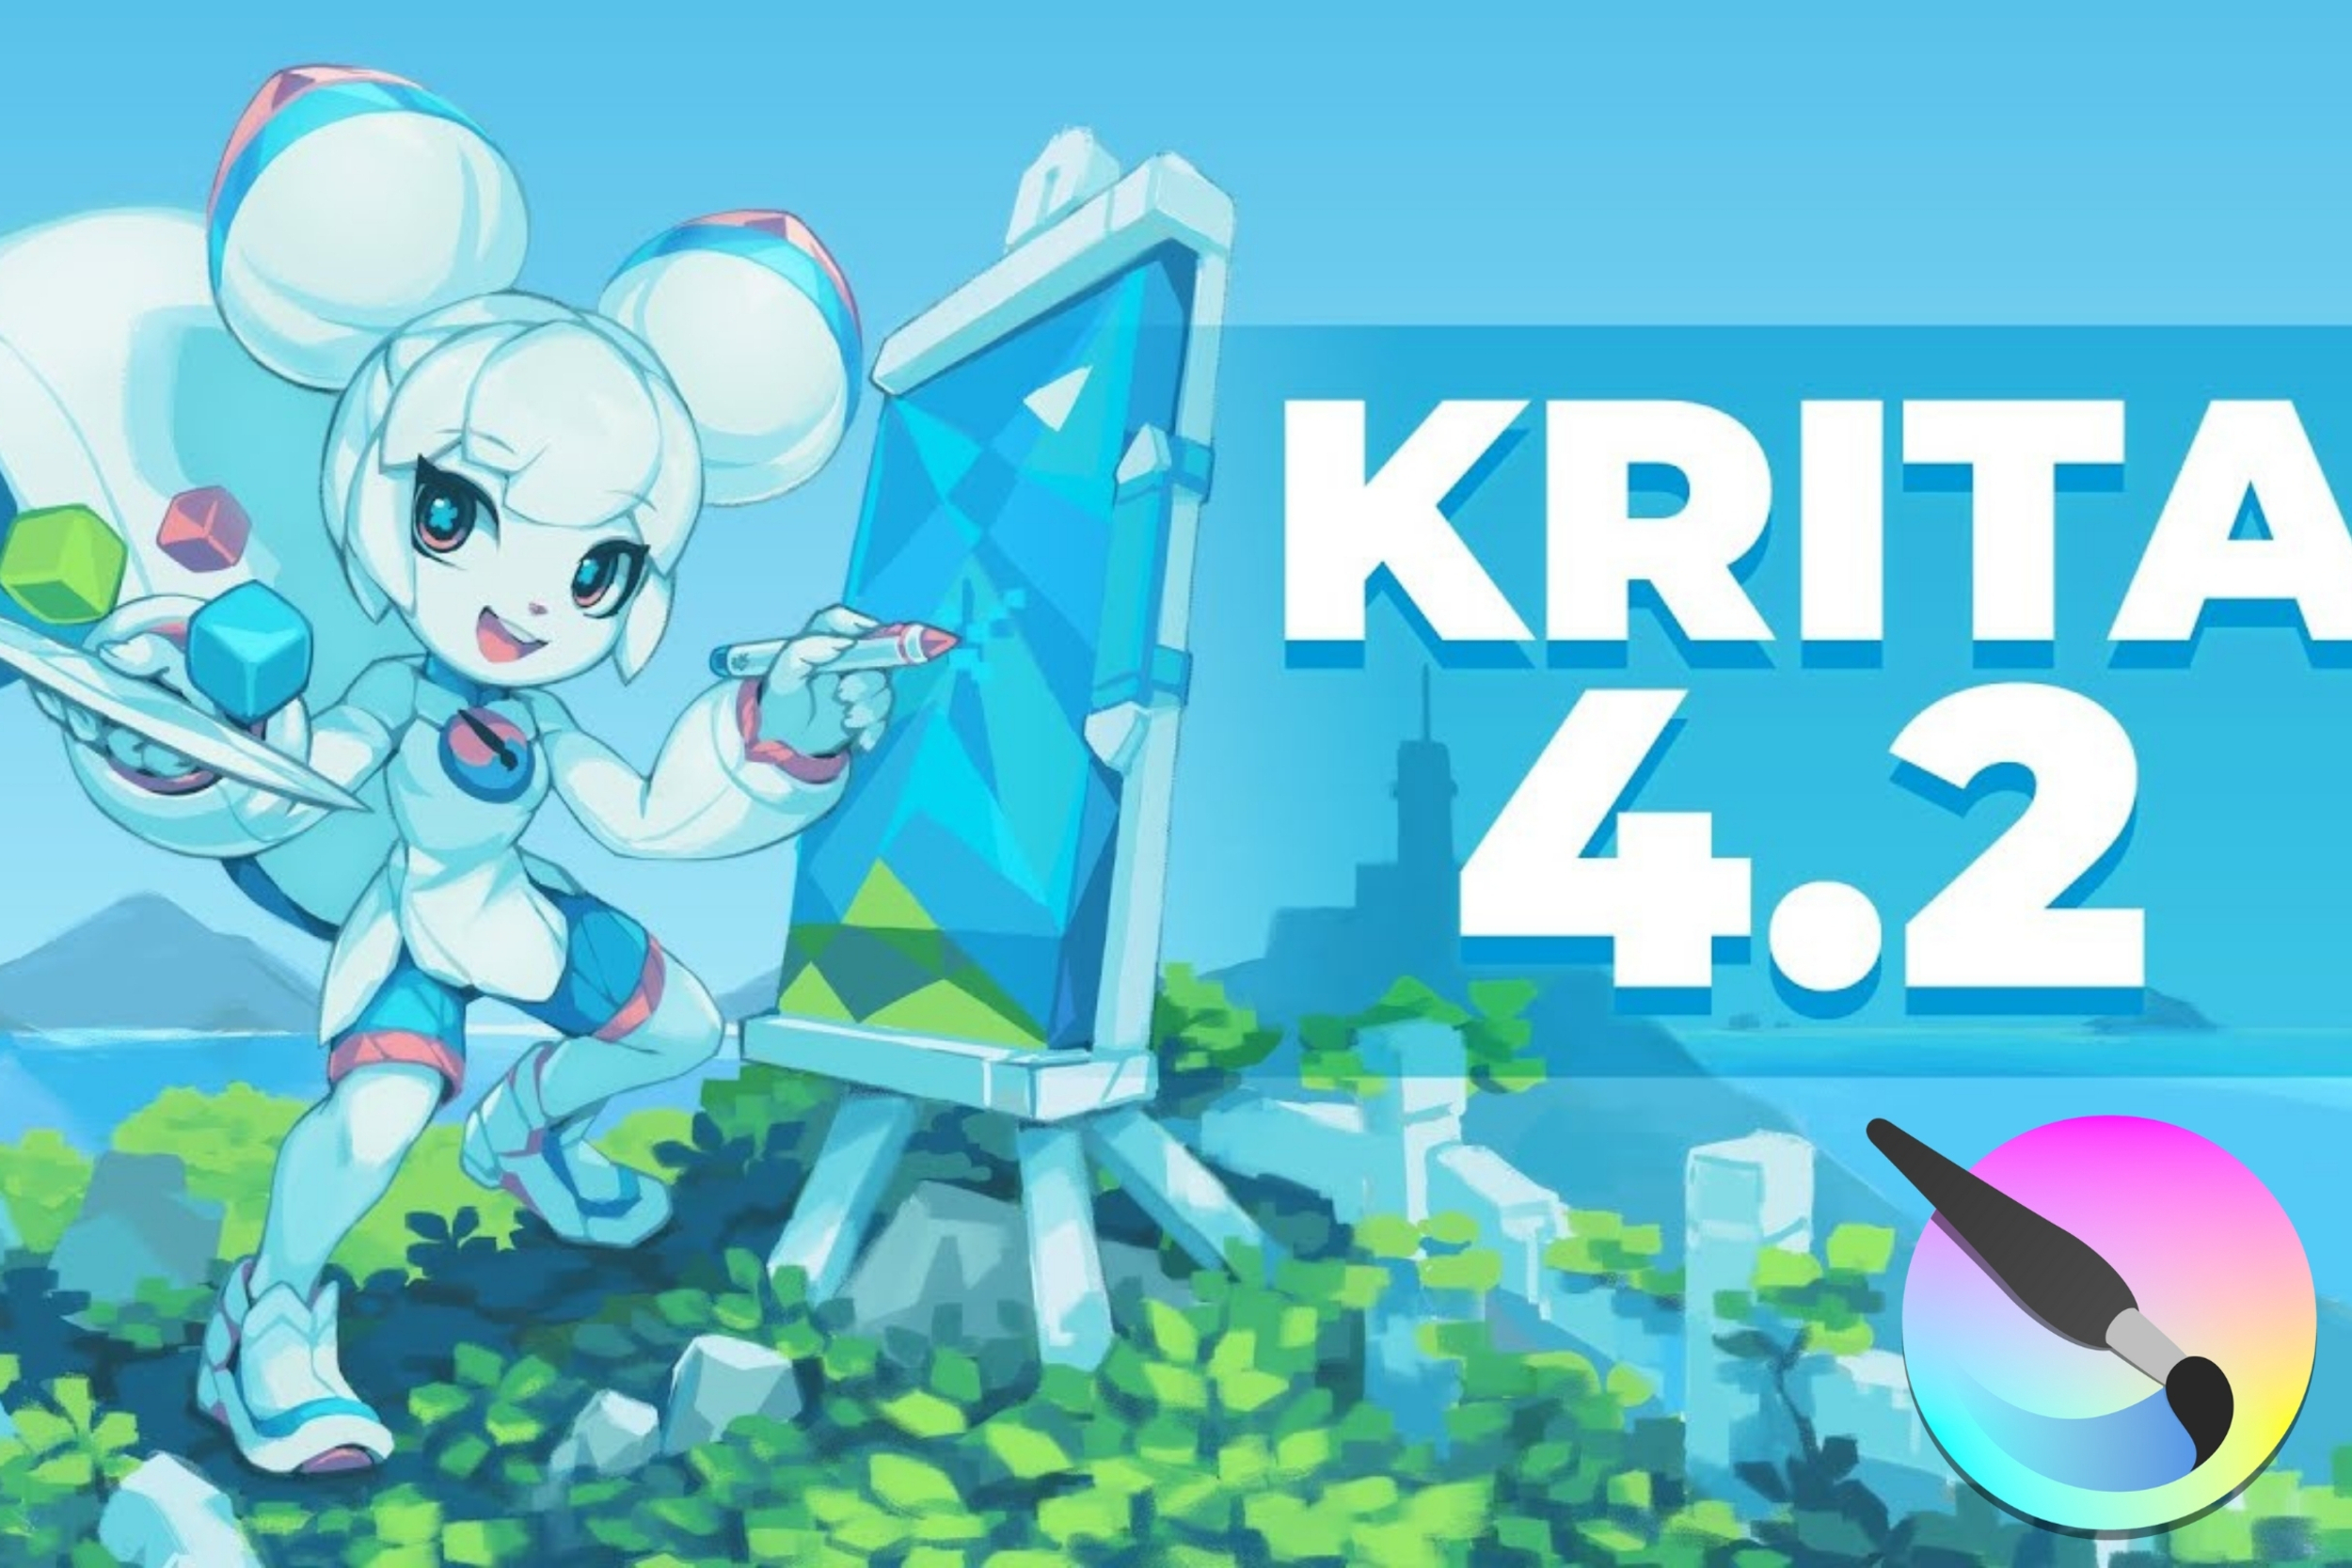 Krita And The World Of Animation - 1010 Coding | Live Online Coding for Kids